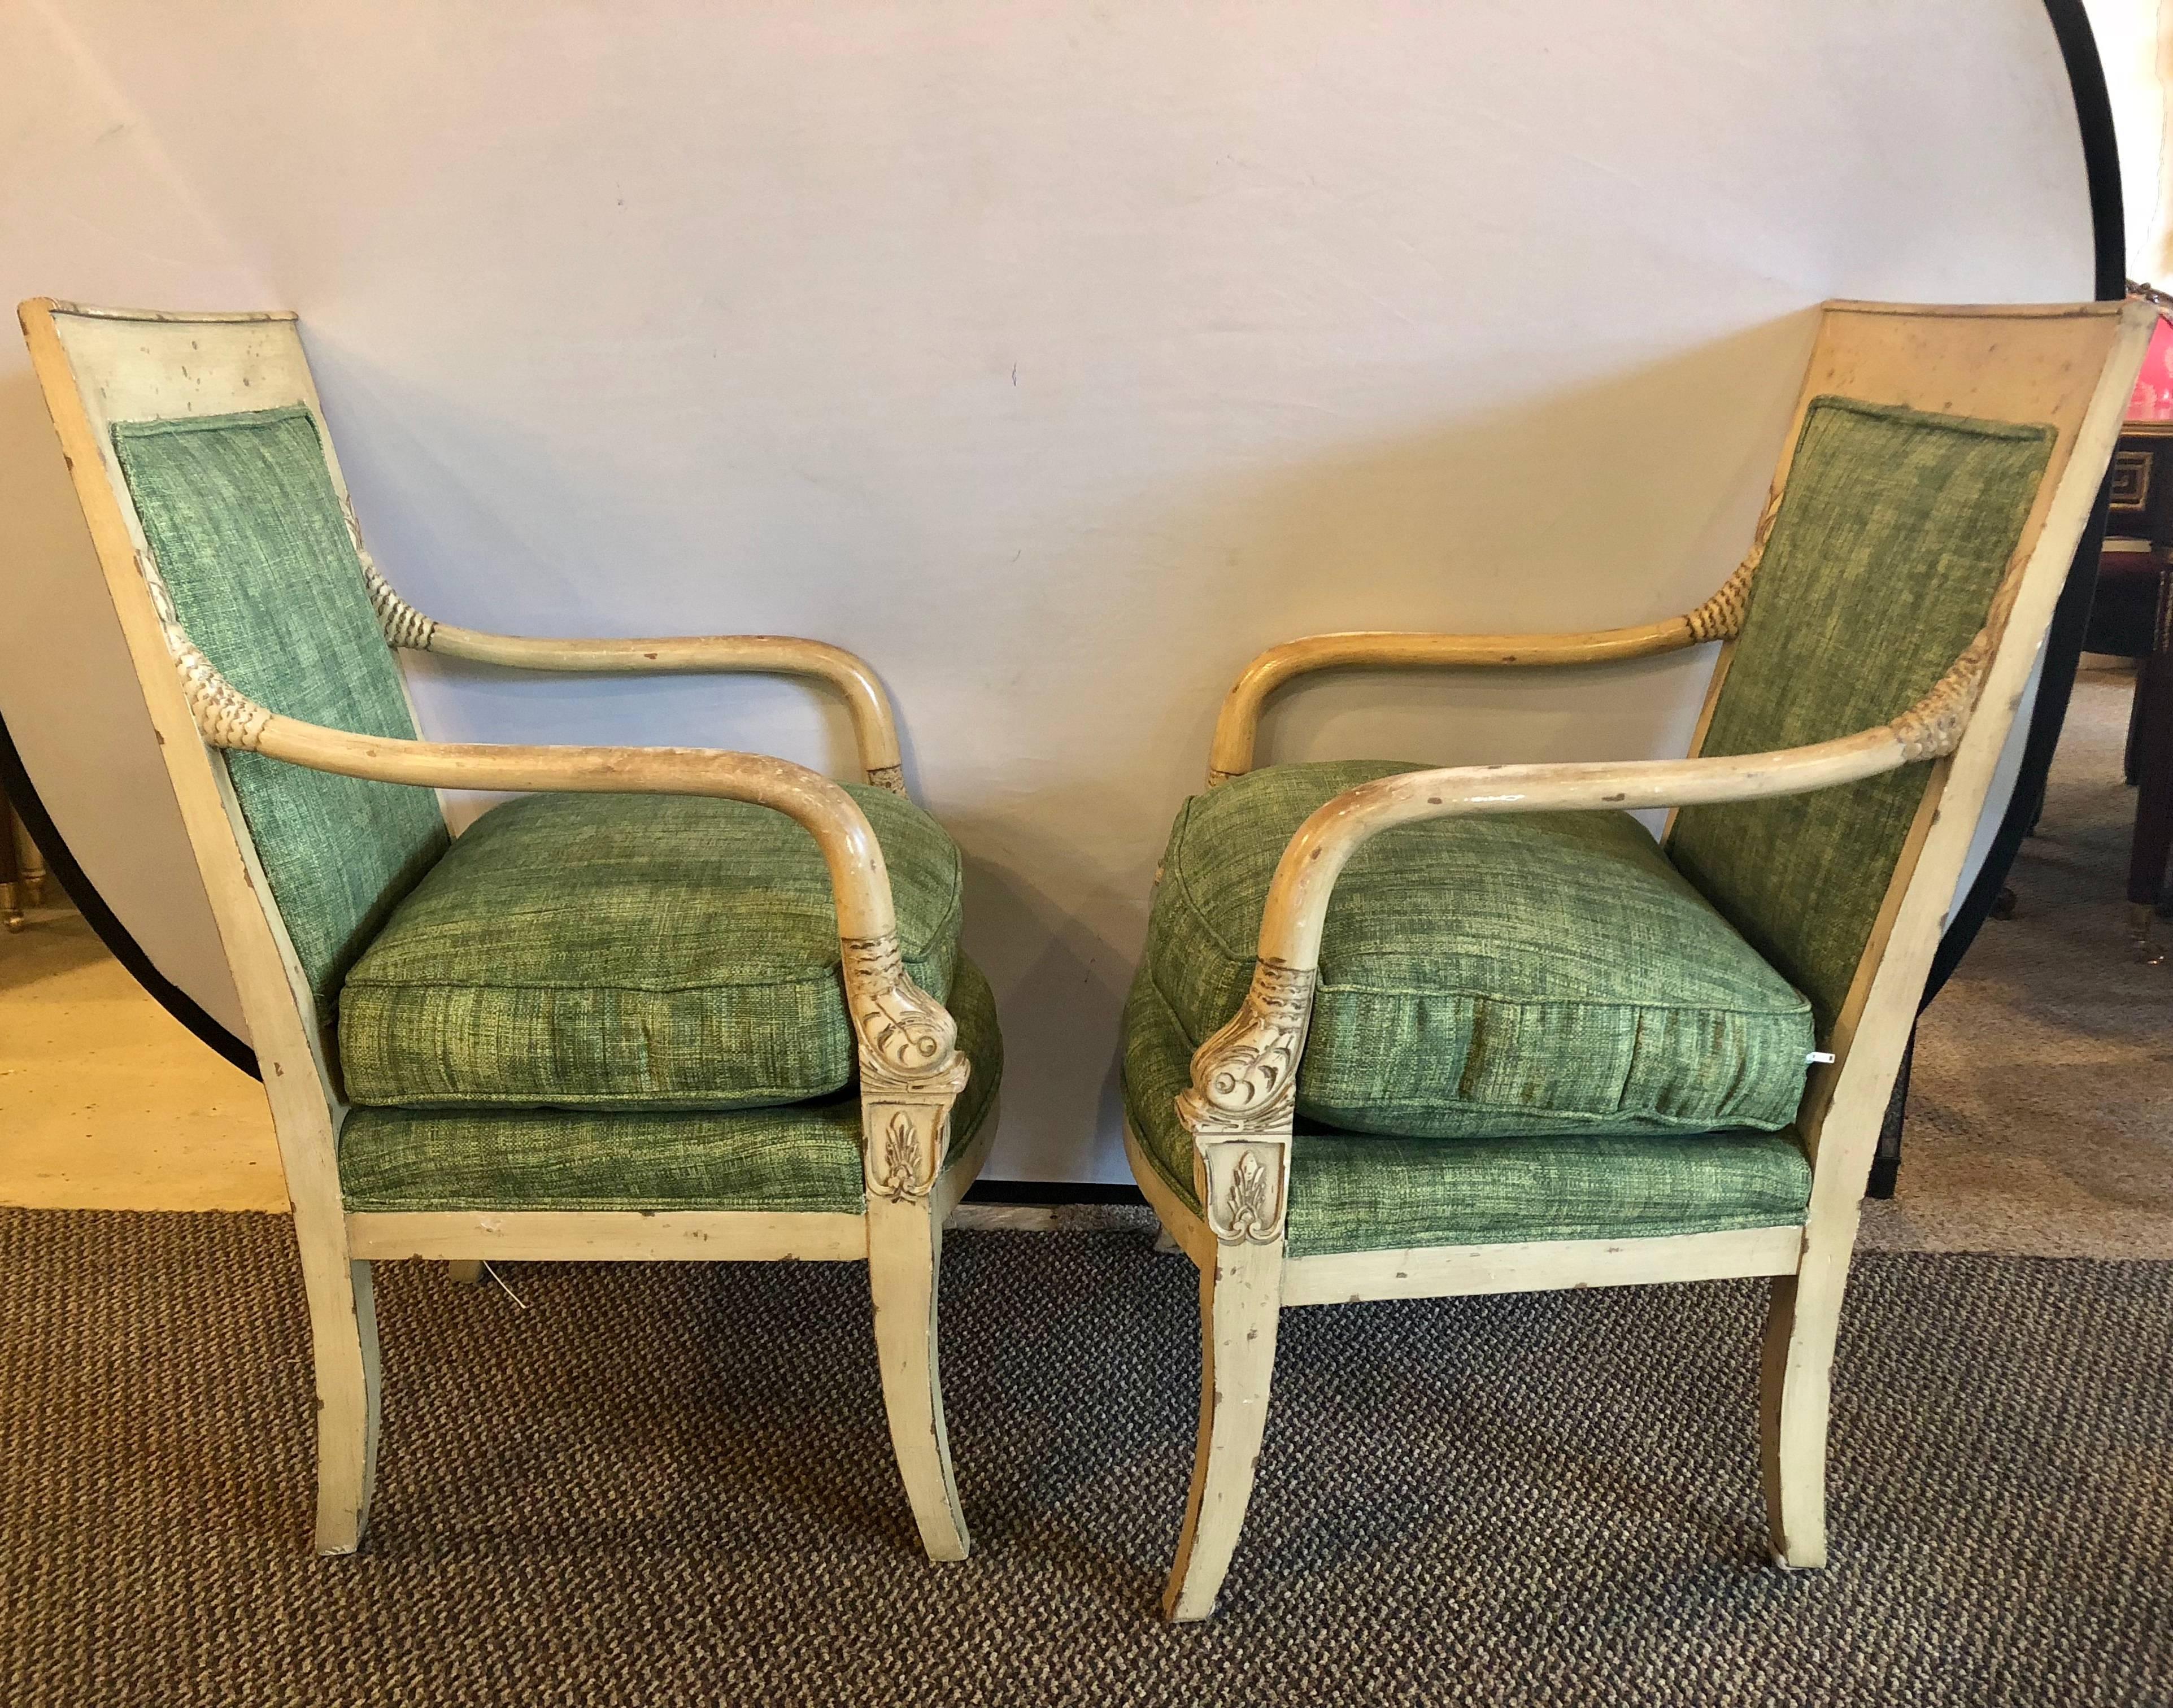 Pair of neoclassical style carved dolphin head distressed Bergeres or armchairs having a new fabric. These purposely distressed arm chairs have fish head hand rests carved into the frames. Each in a forest green material with down cushions. This